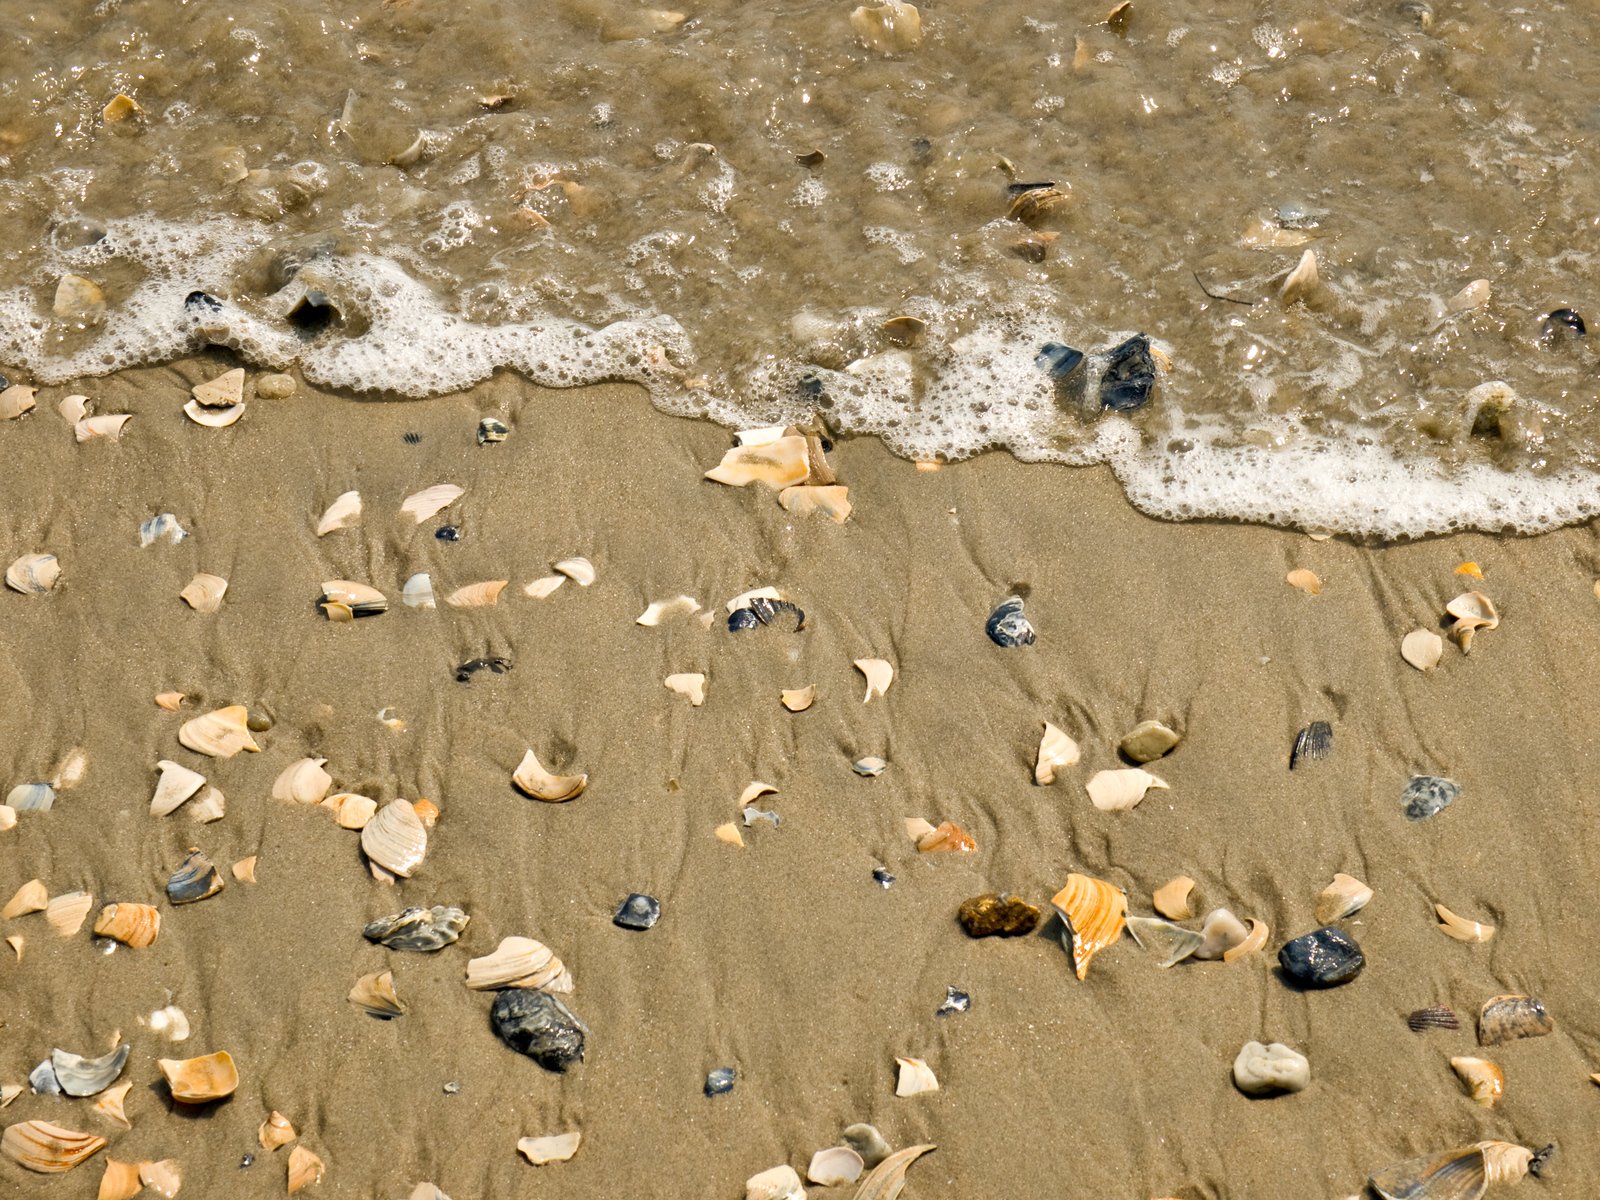 small rocks and shells lay on the sand near the water